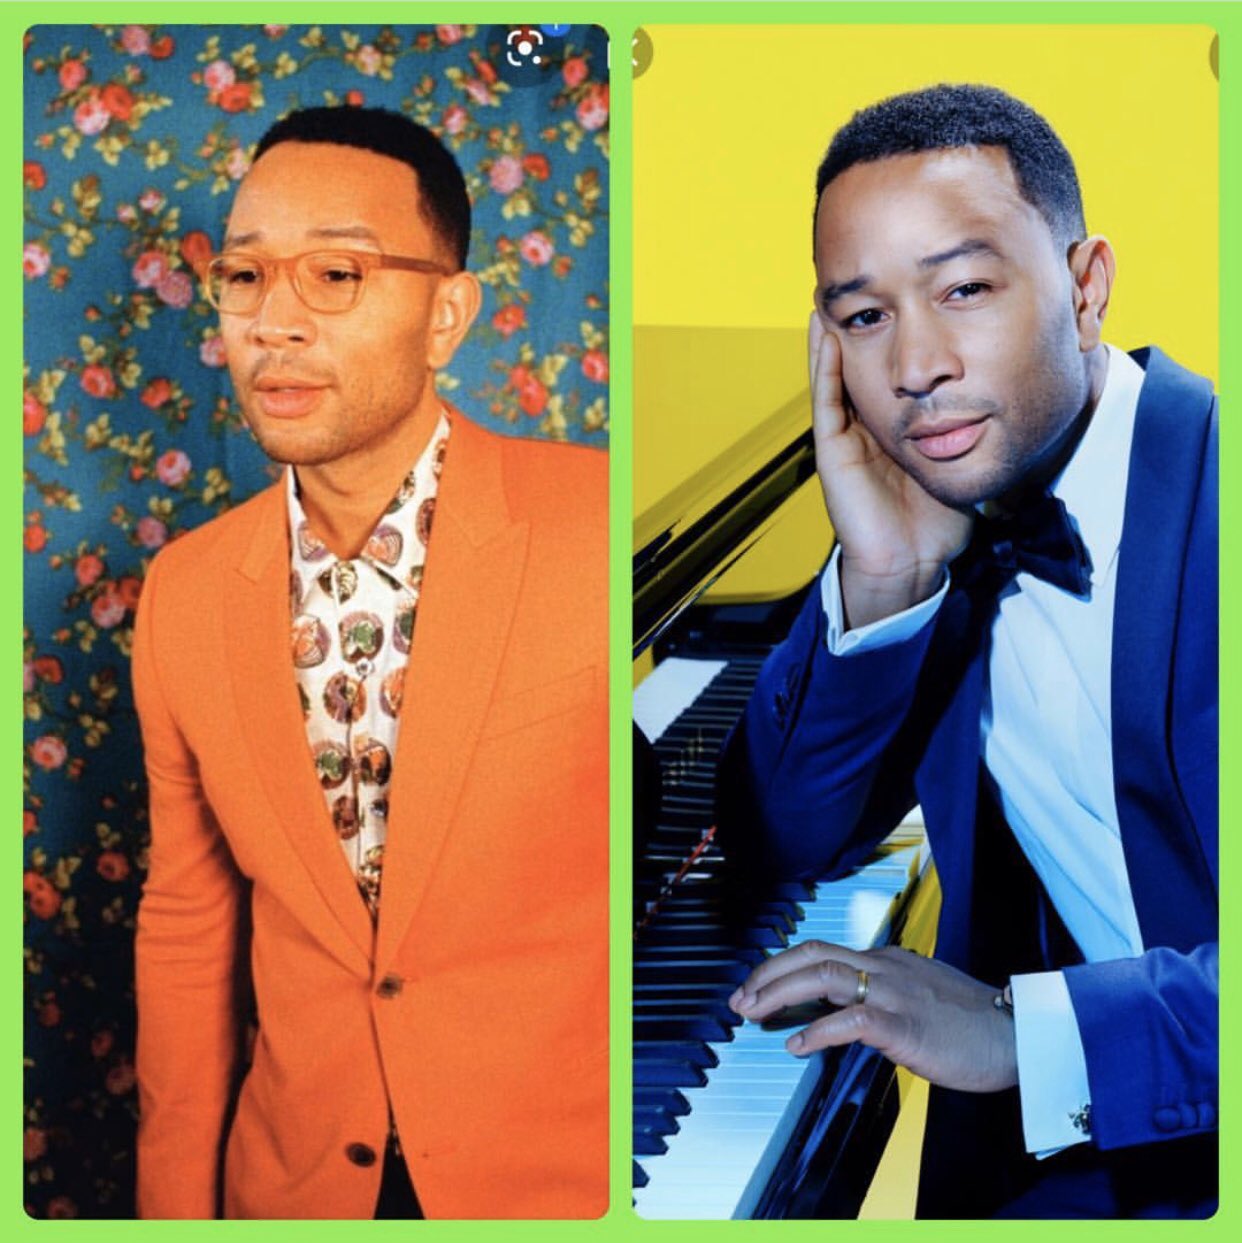 Happy 41st bday to John Legend wishing you many more  